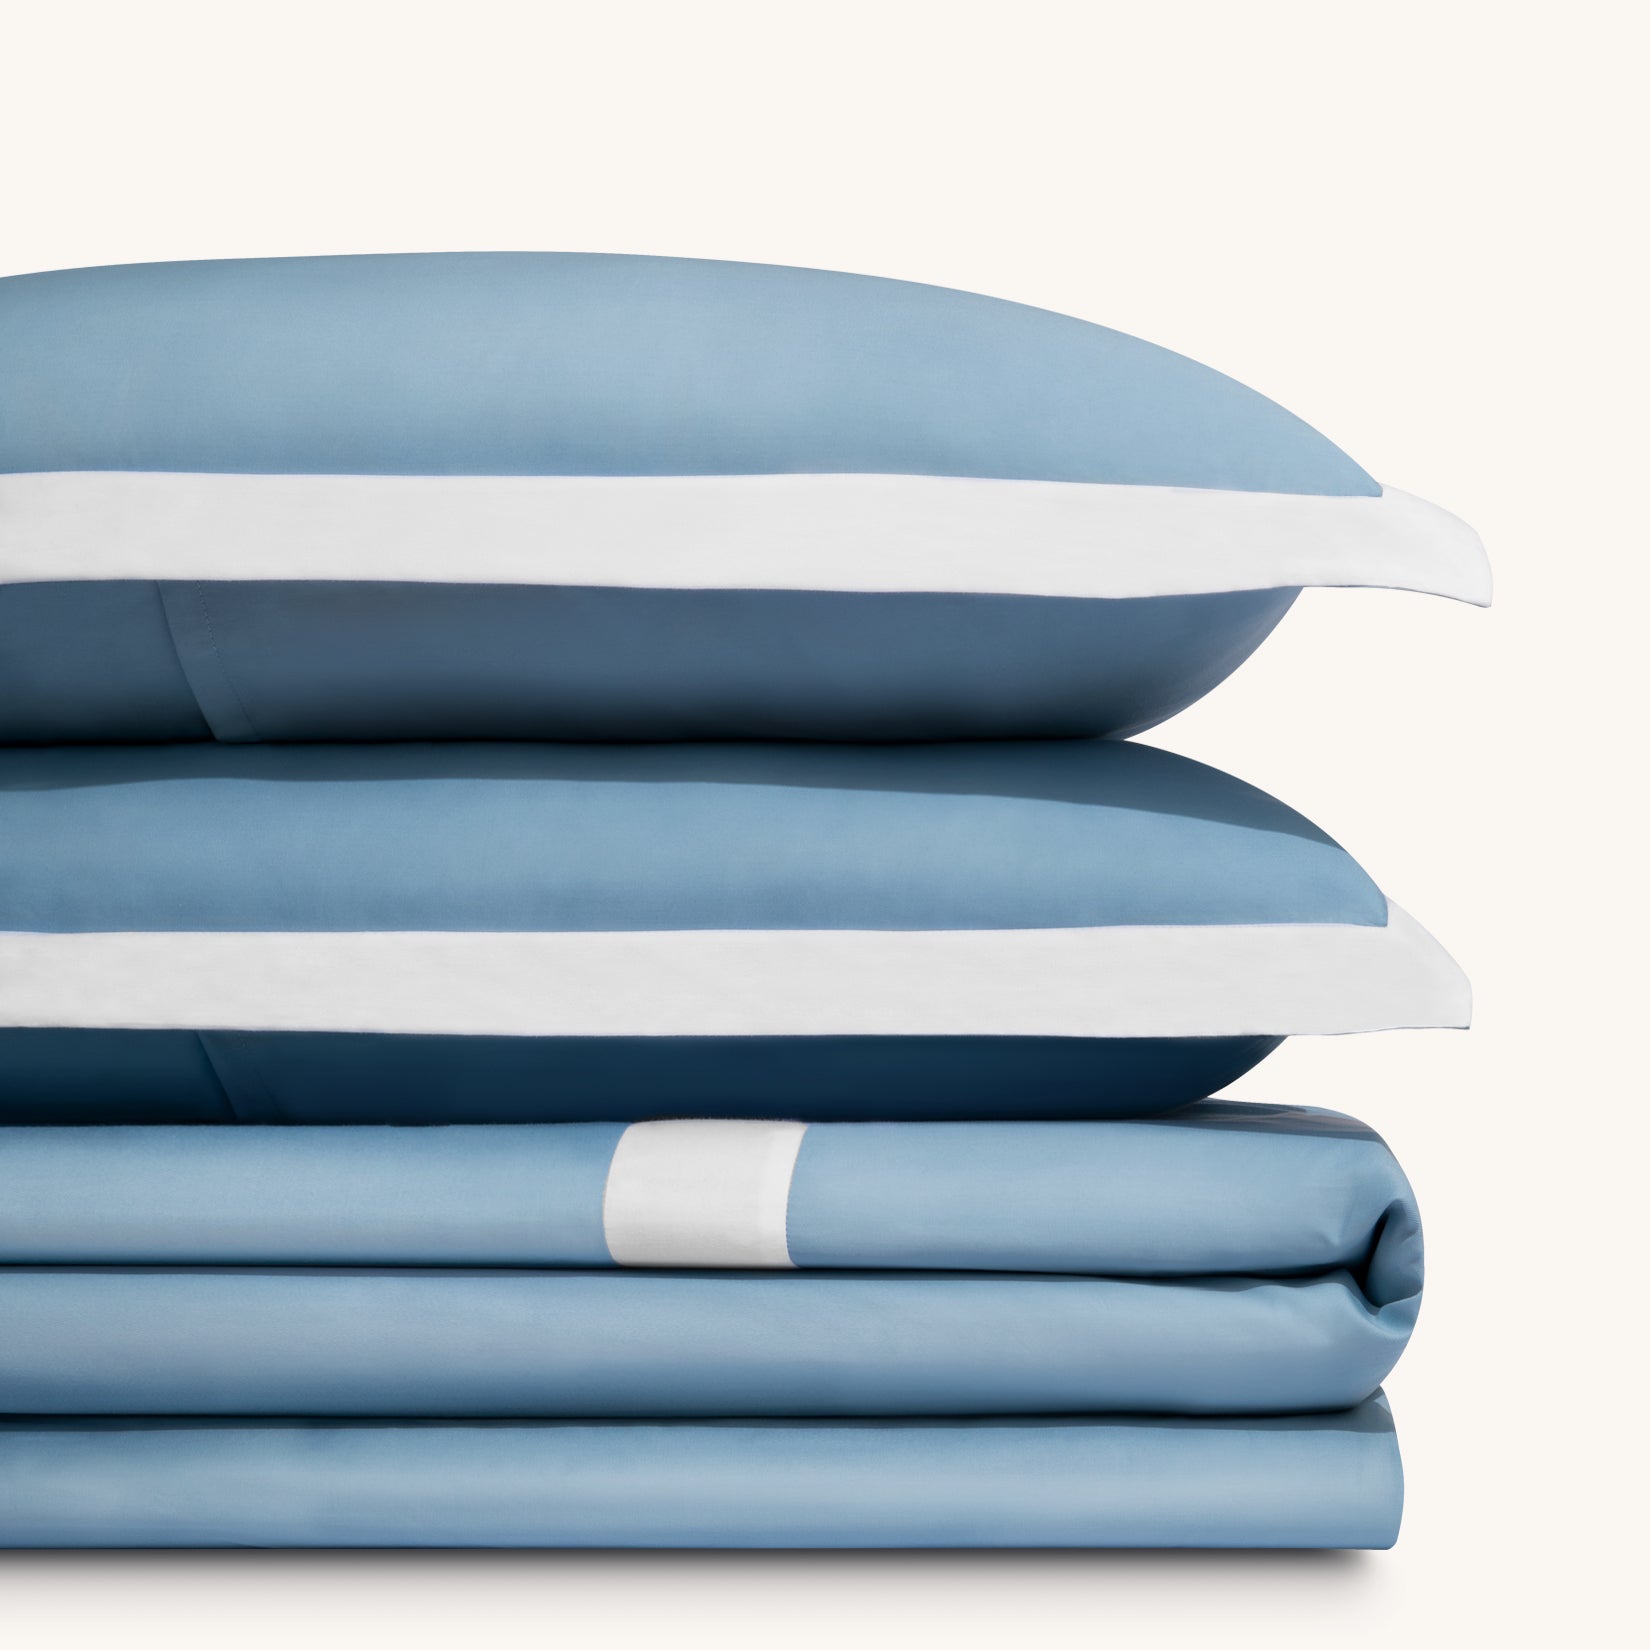 Paulina Sky Blue 200 thread count combed cotton duvet set. Two white and sky blue pillows stacked on folded white and blue cotton duvet set.Paulina Sky Blue 200 thread count combed cotton duvet set. Two white and sky blue pillows stacked on folded white and blue cotton duvet set.